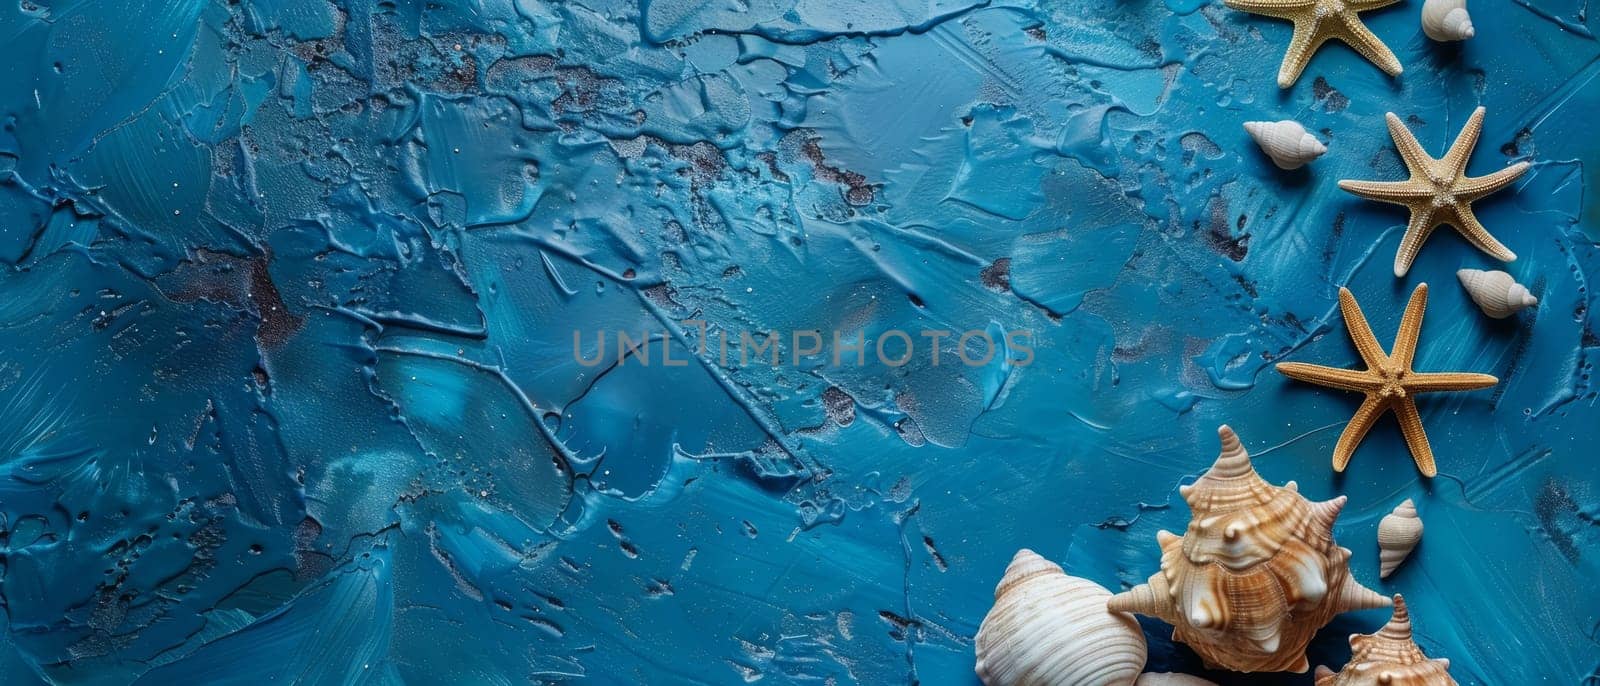 This stock image captures a calm seascape essence with scattered shells and starfish on a serene blue backdrop, designed for versatile use. Copy space for advertising, presentation product or text. by sfinks